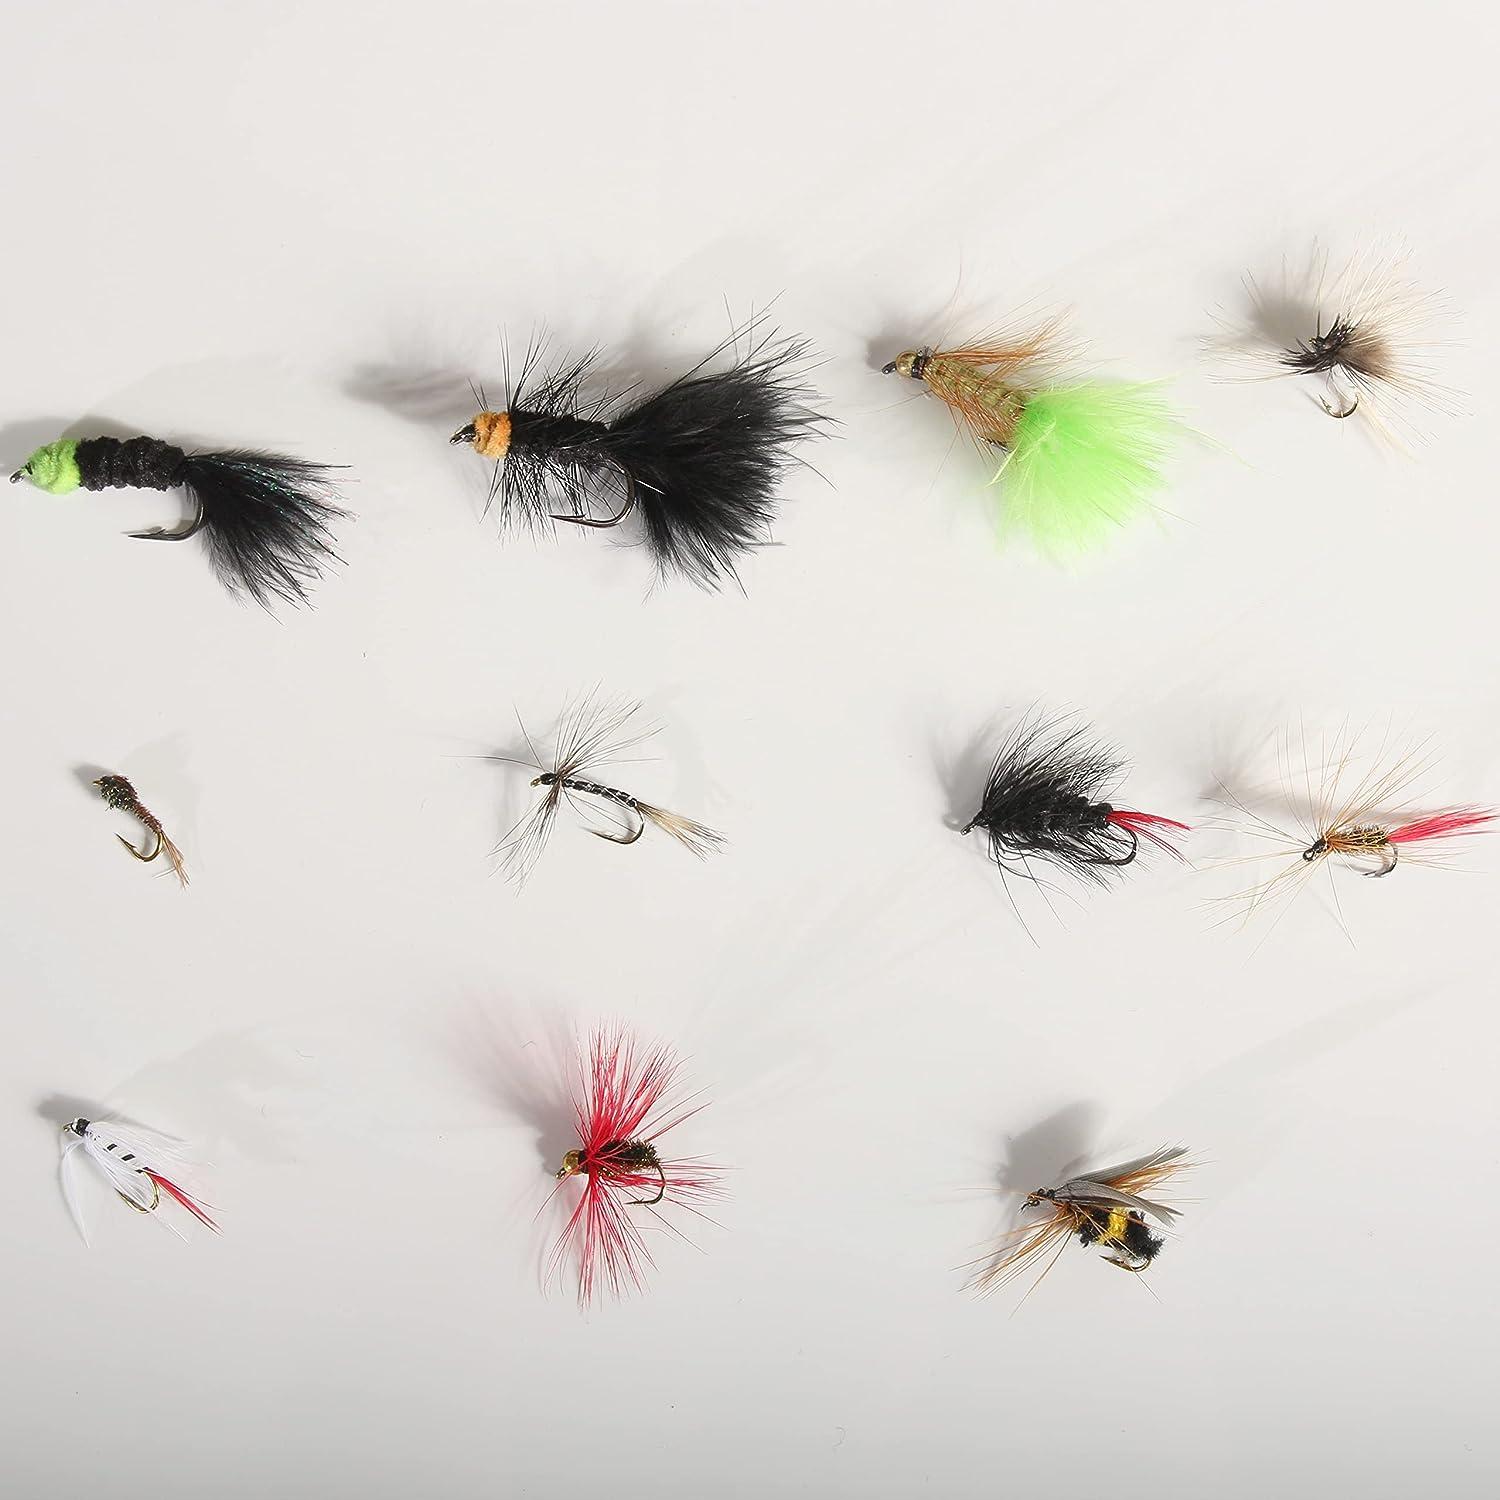 Ansnbo 36PCS Fly Fishing Flies Kit, Hand Tied Trout Bass Fly Assortment  with Fly Box, Dry Wet Nymph Flies Streamers Fly Fishing Gear Gift :  : Sports, Fitness & Outdoors